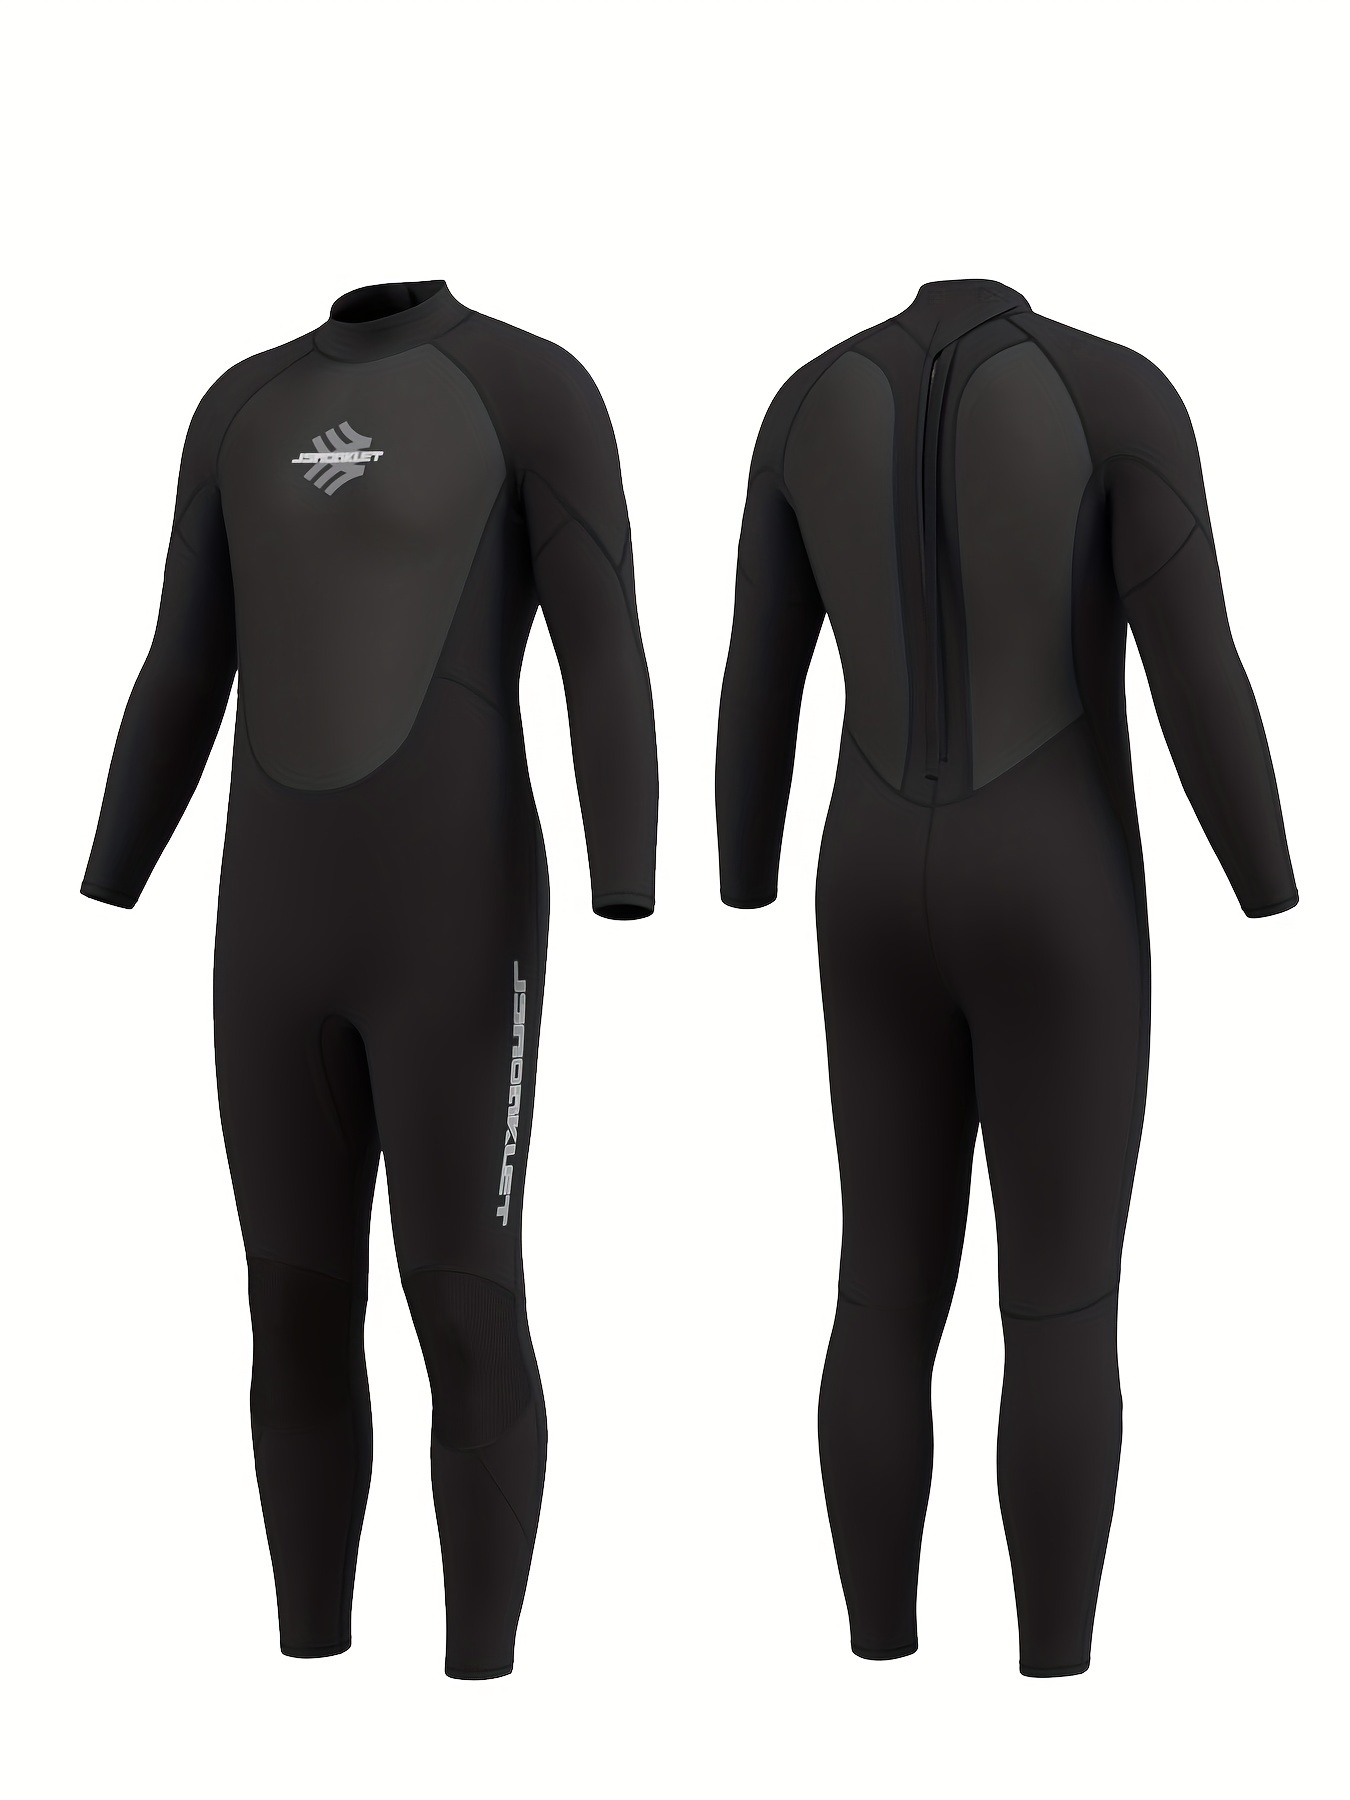 REALON Wetsuit Men 4/5mm Womens Neoprene Full Body Thermal Scuba Diving  Suits, 3/4mm One Piece Wet Suit Cold Water Swimsuits For Surfing Snorkeling